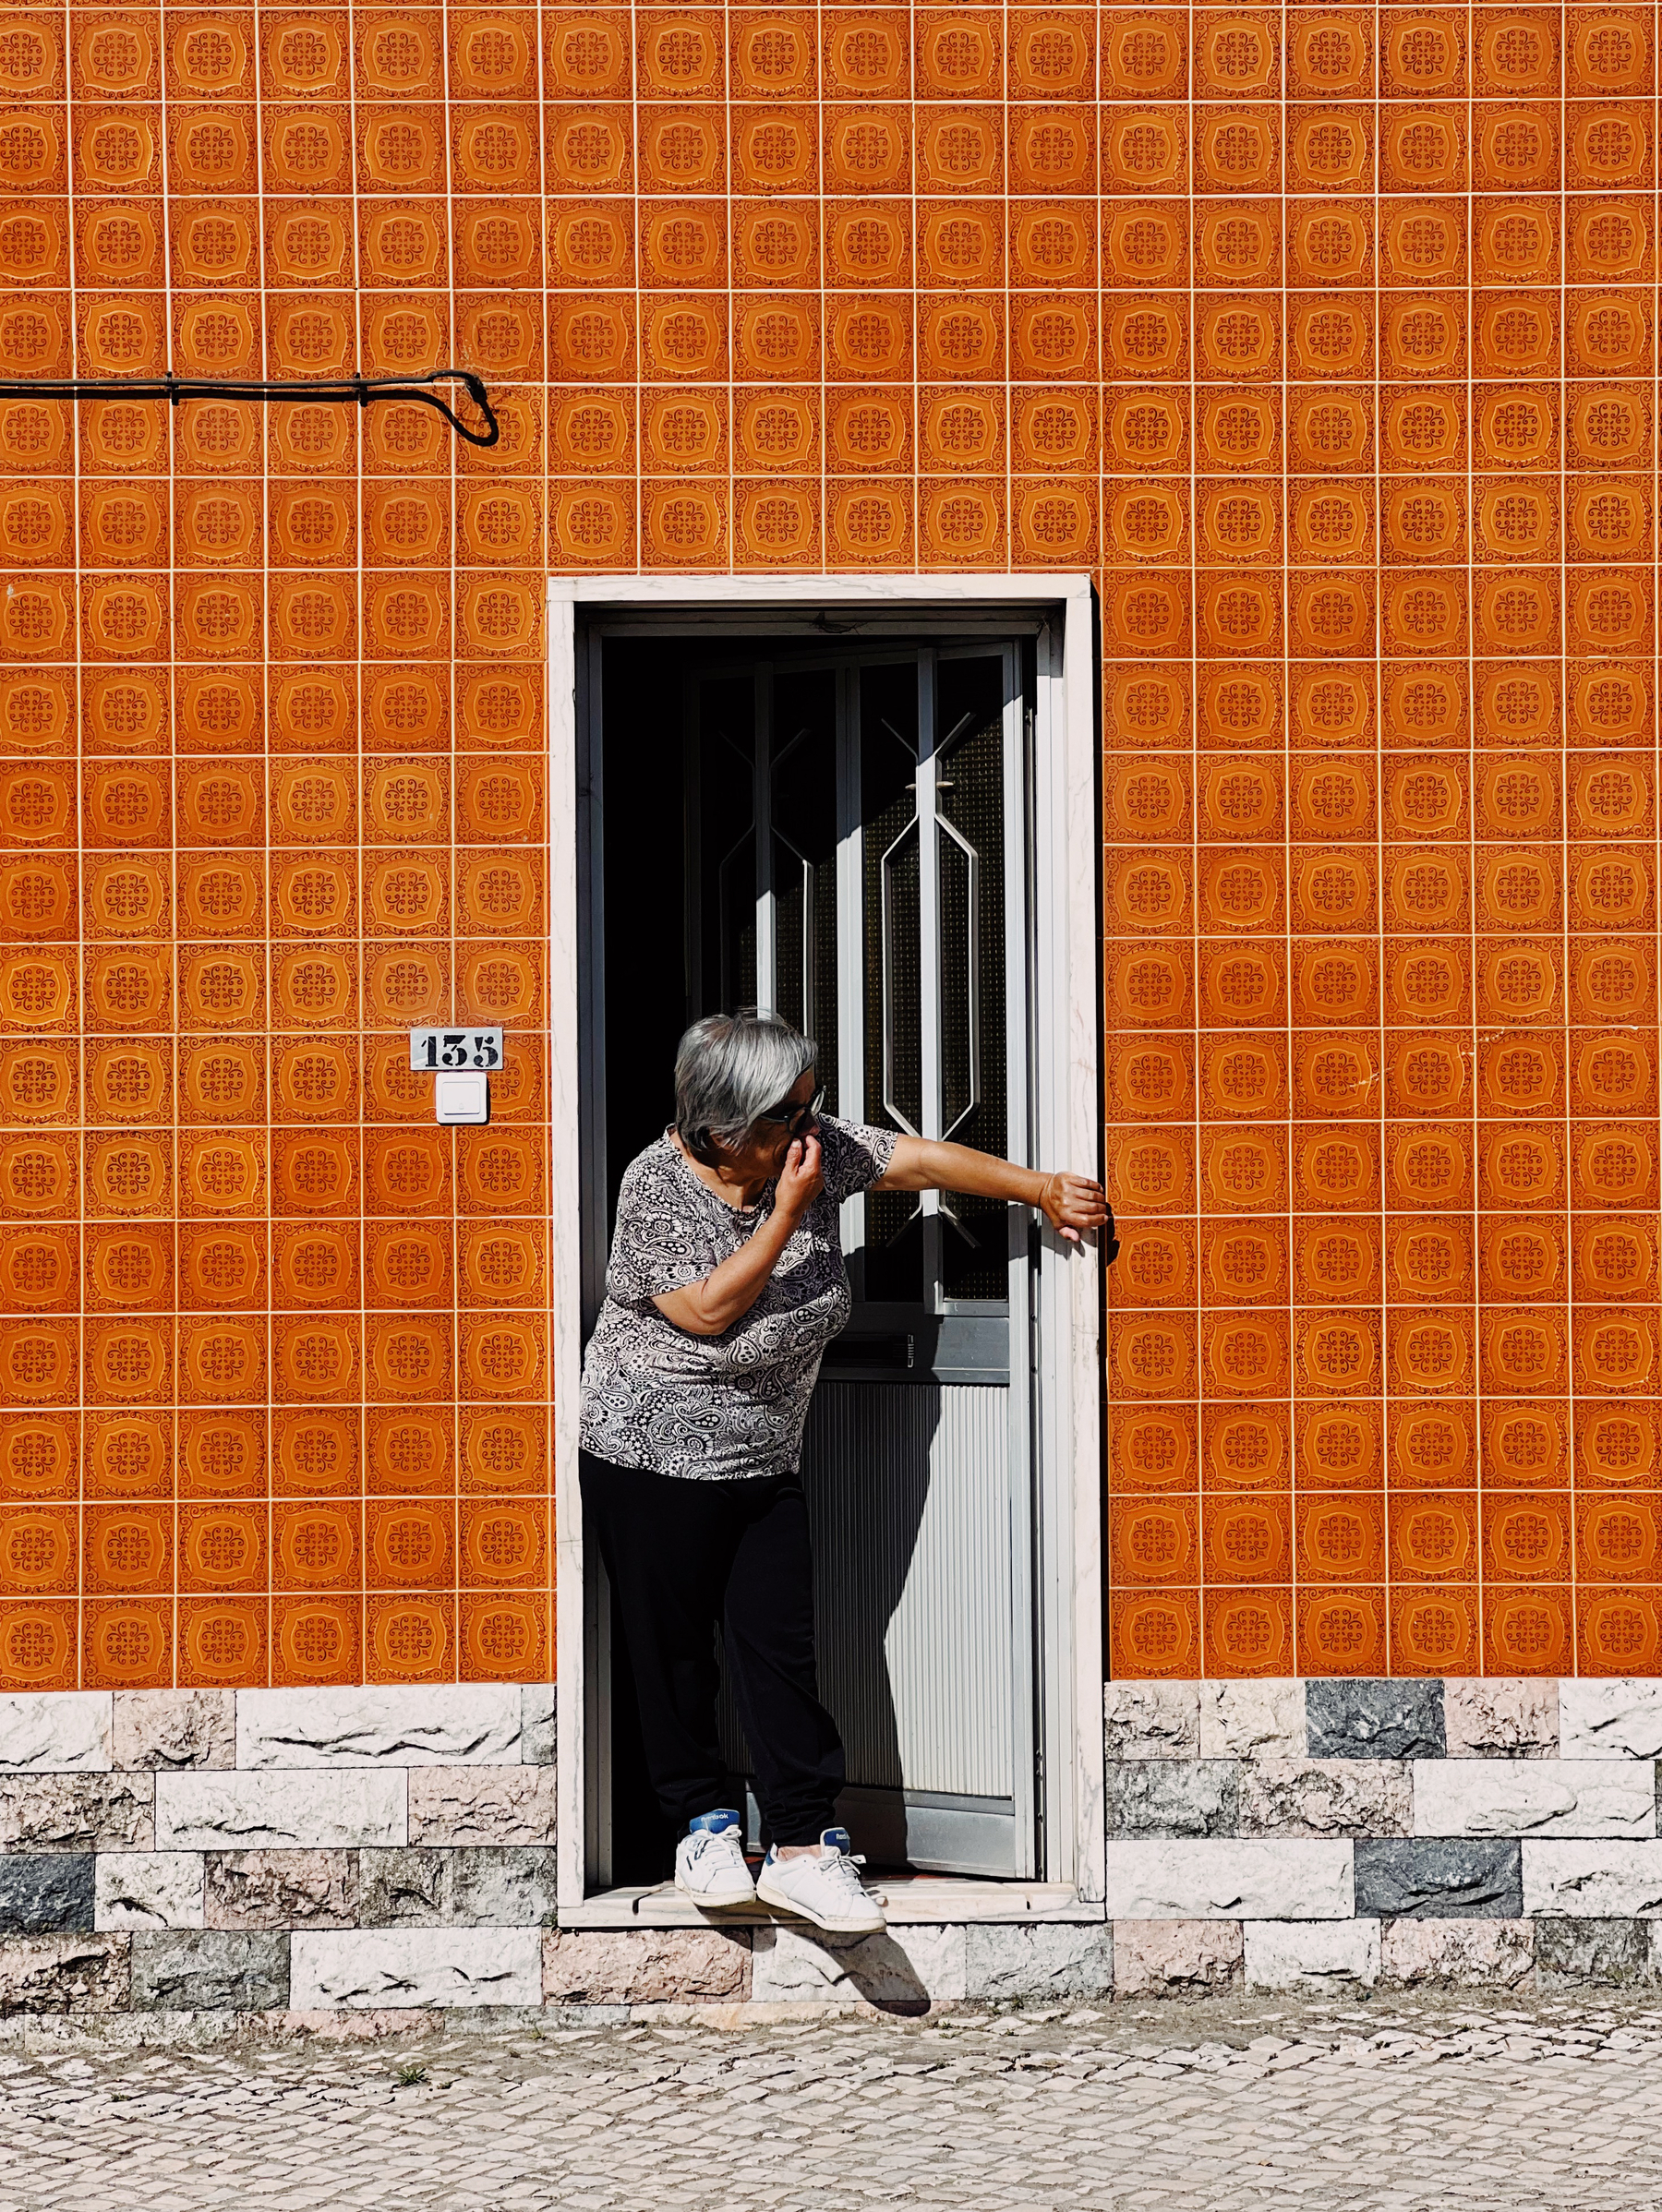 A woman look out the door, on a orange tiled house. 